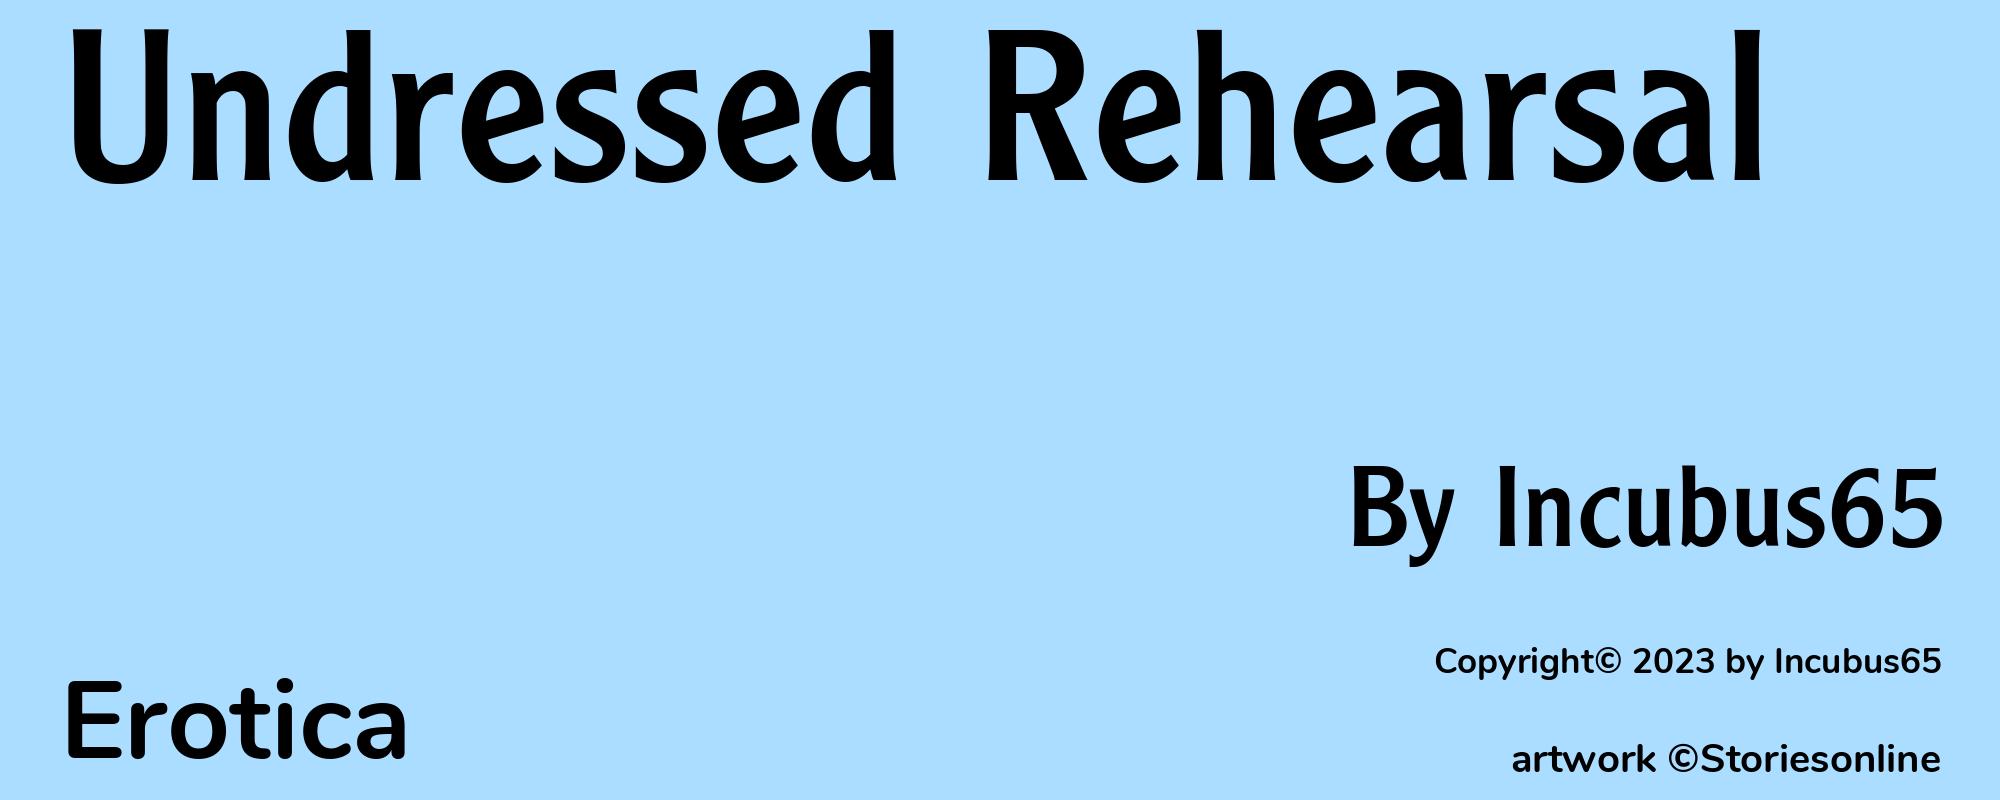 Undressed Rehearsal - Cover